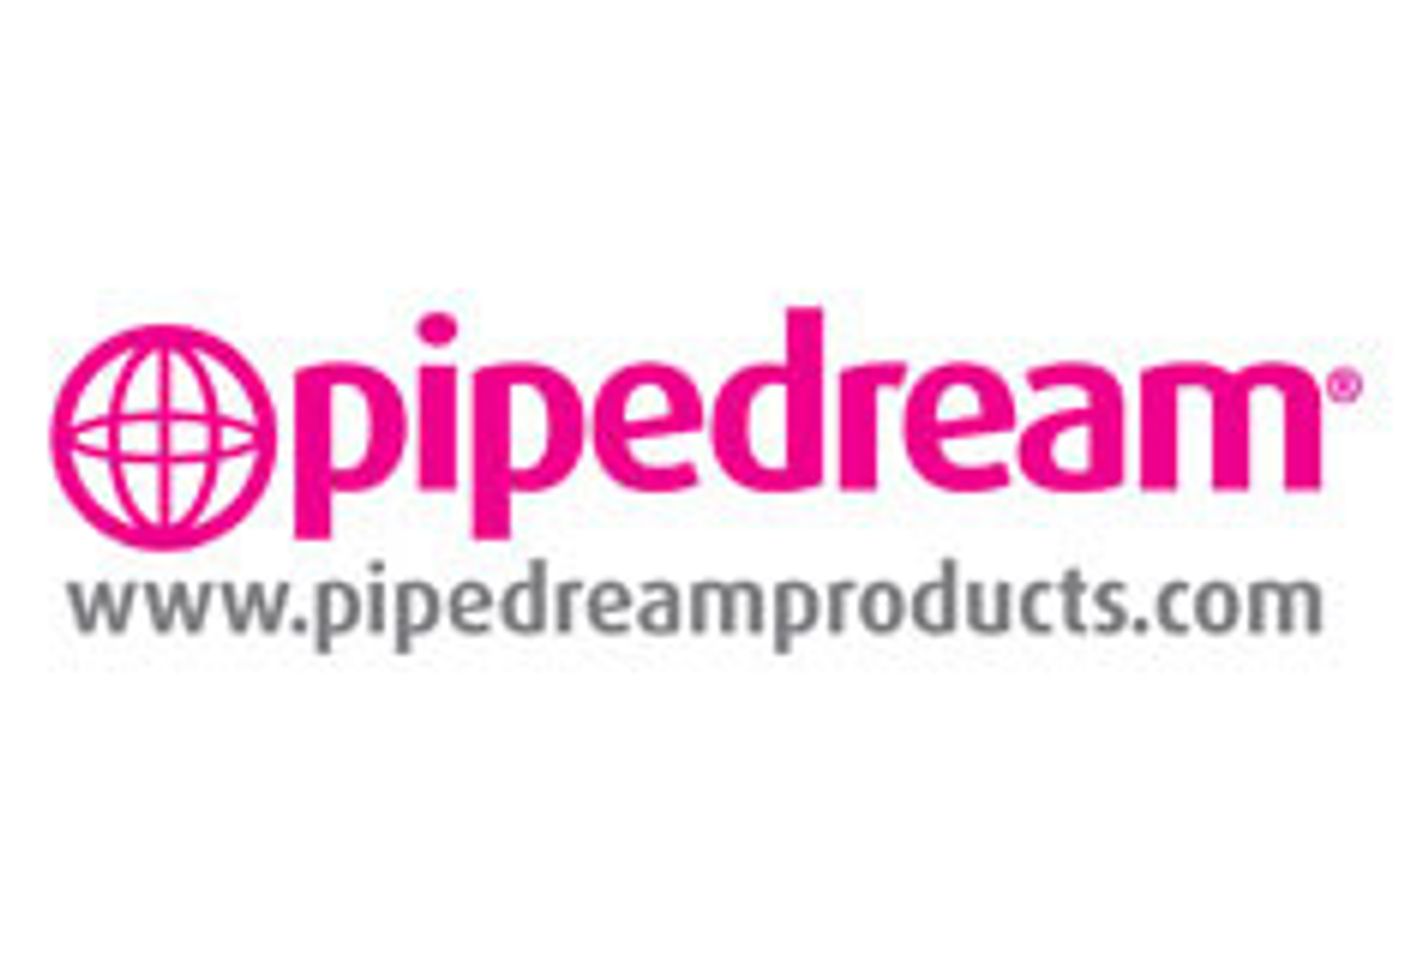 Pipedream Gets Versatile for Publicity